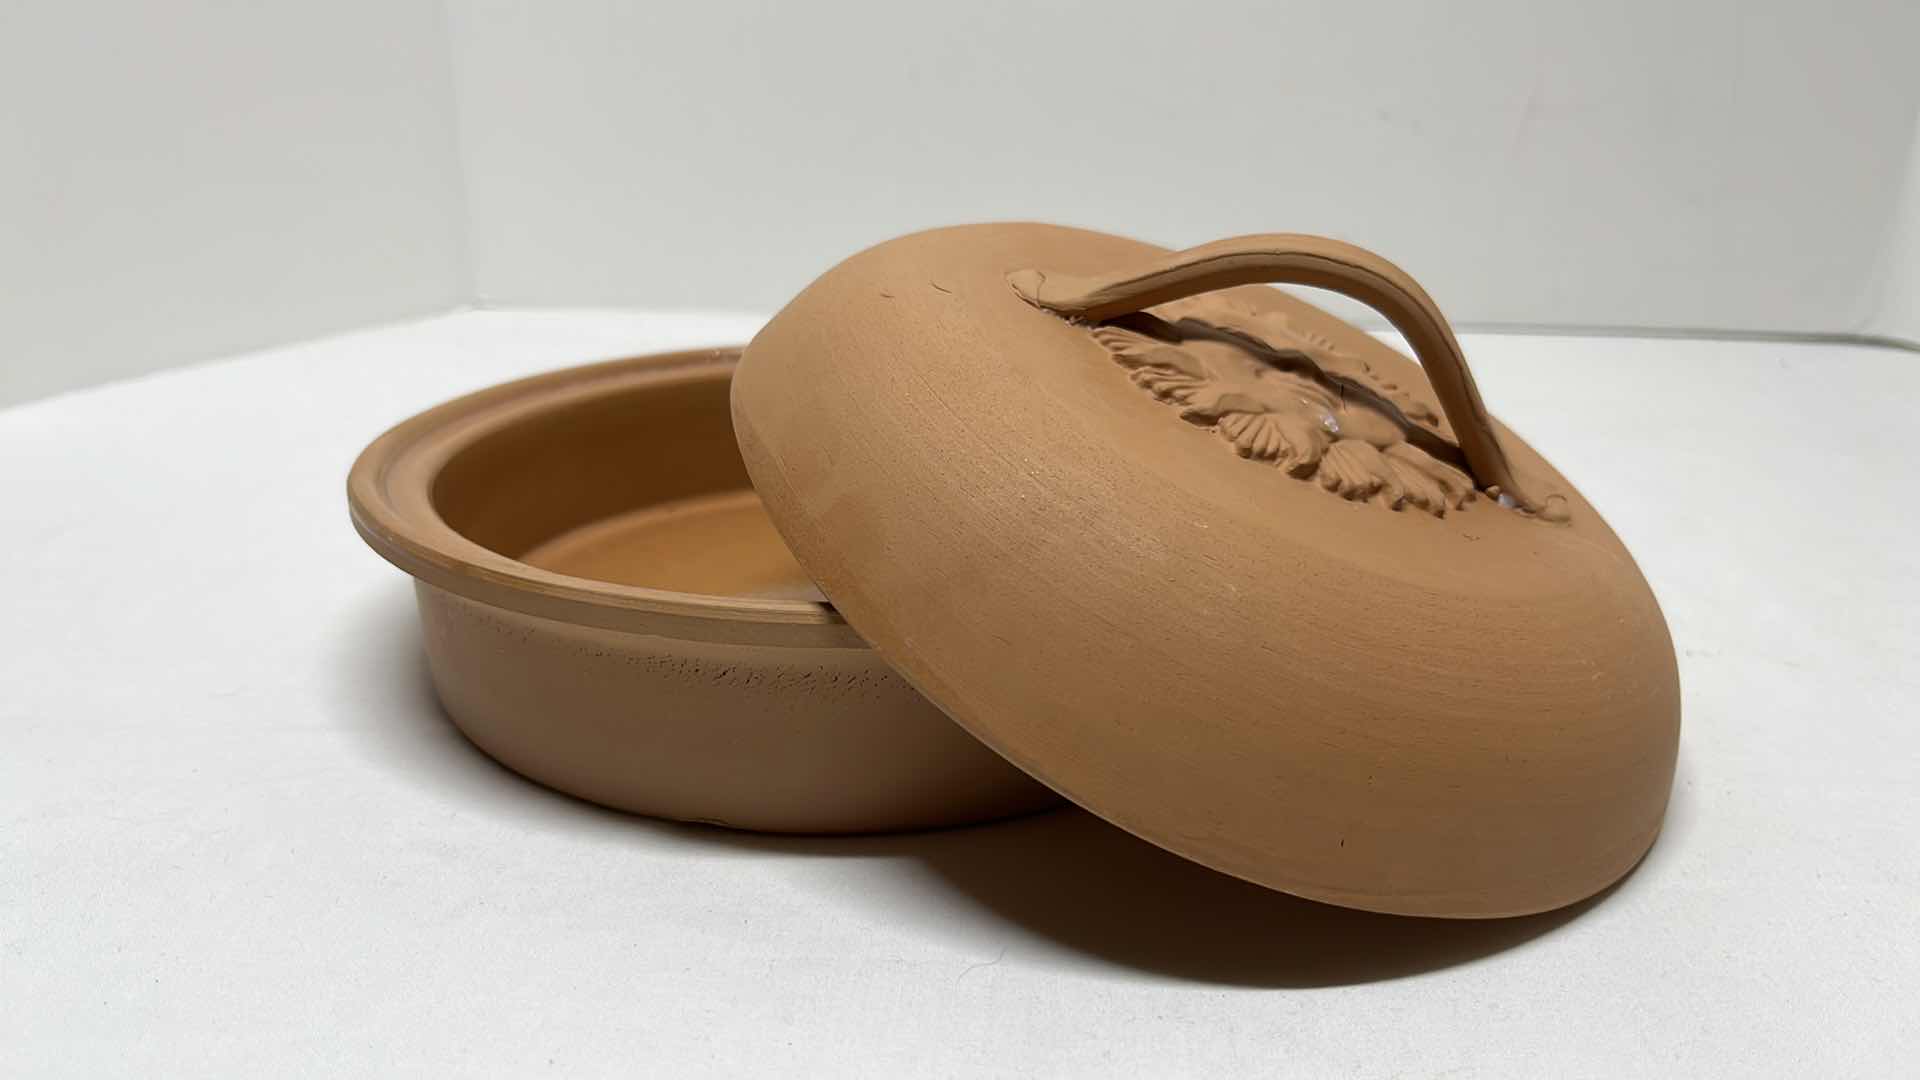 Photo 2 of CLAY TORTILLA WARMER 6.75” & CANDLE HOLDER 6.25”H W DISH